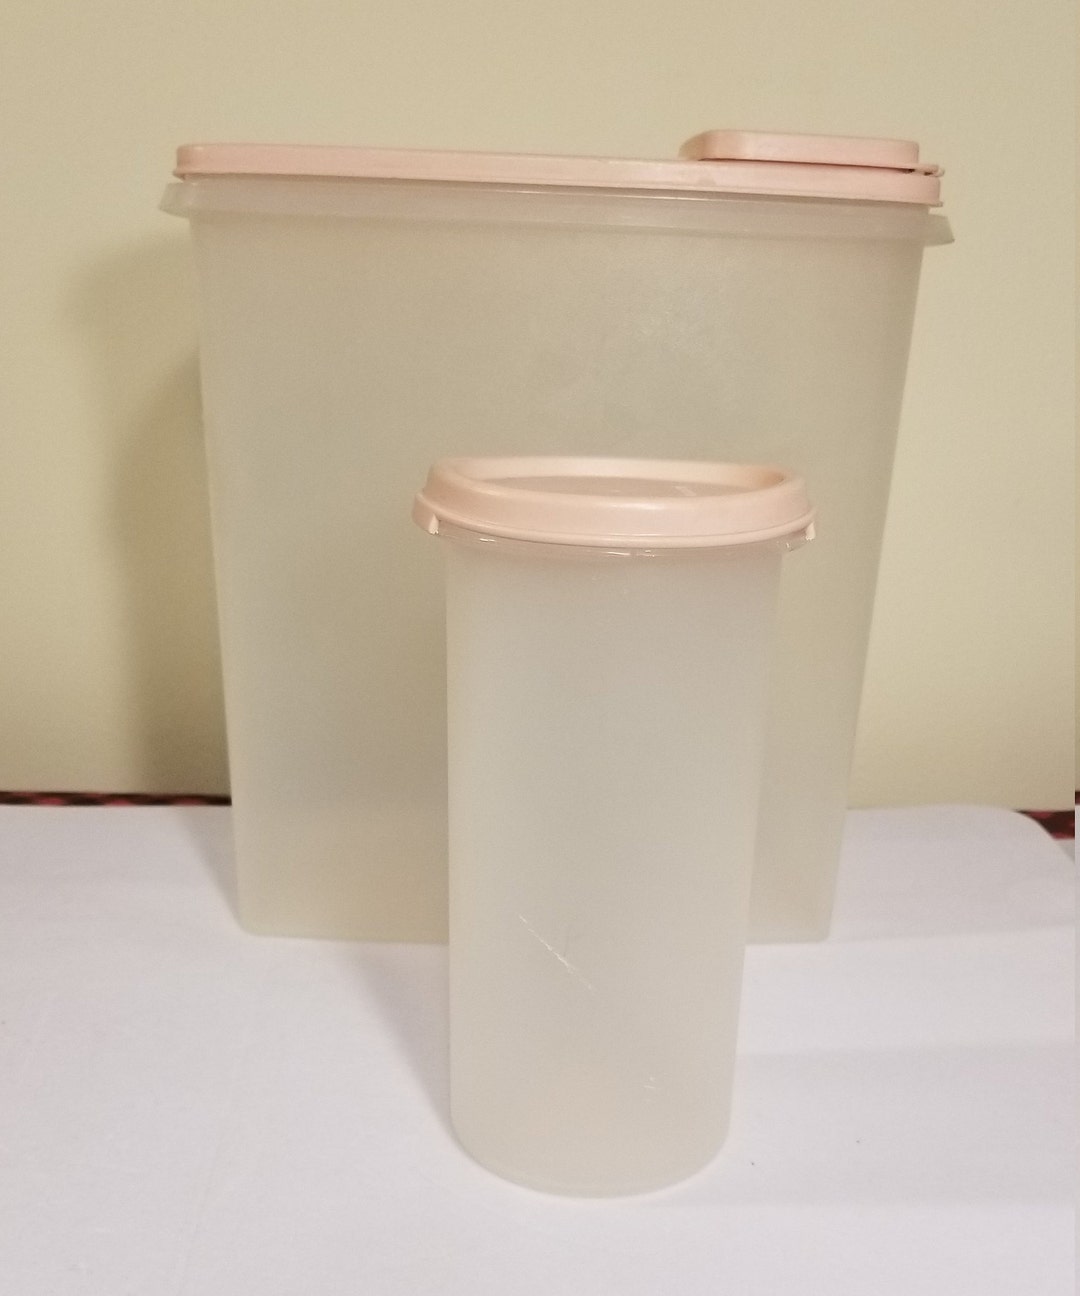 Vintage Tupperware Brand Nesting Cylinder Tupperware, White Plastic  Tupperware With Dark Pink Lids, Vintage Food Storage Containers USA Made 